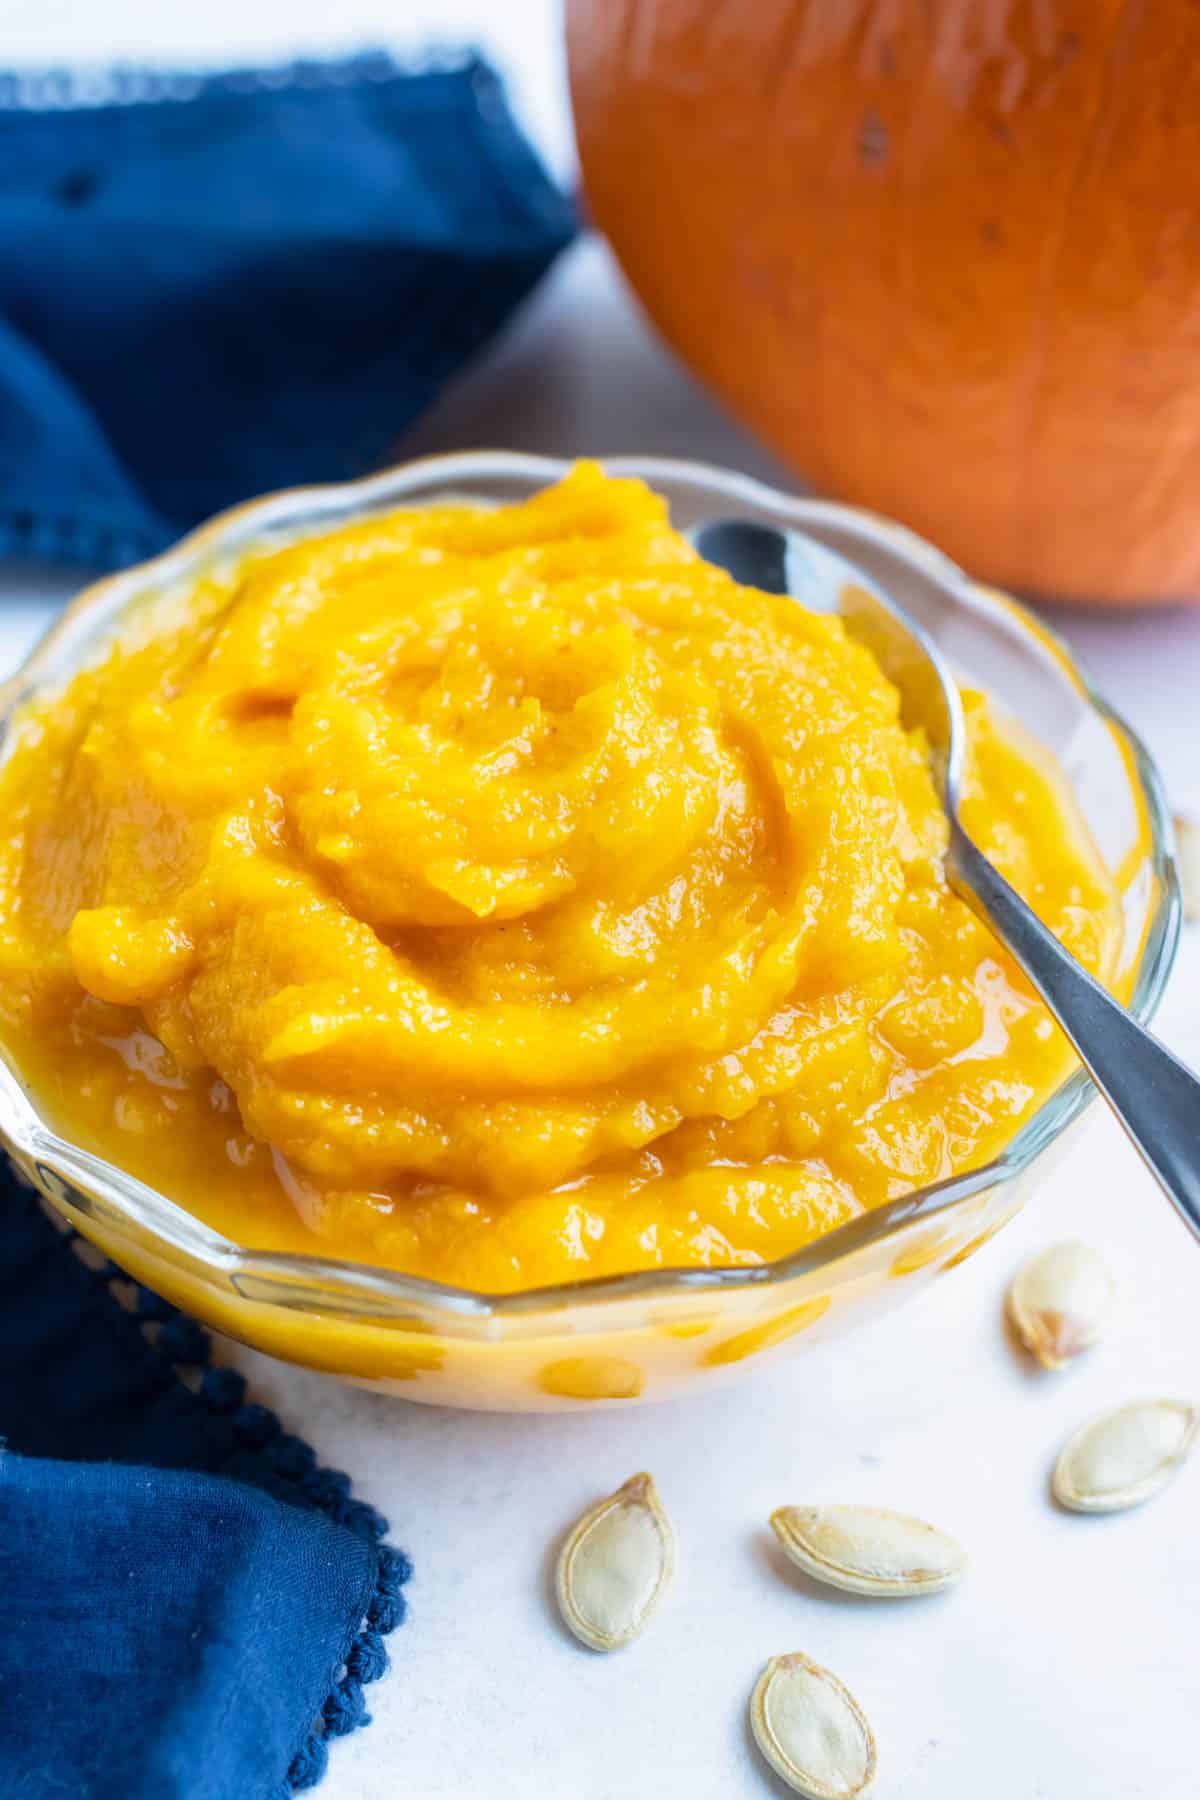 Fresh and creamy pumpkin puree is in a bowl on the counter.